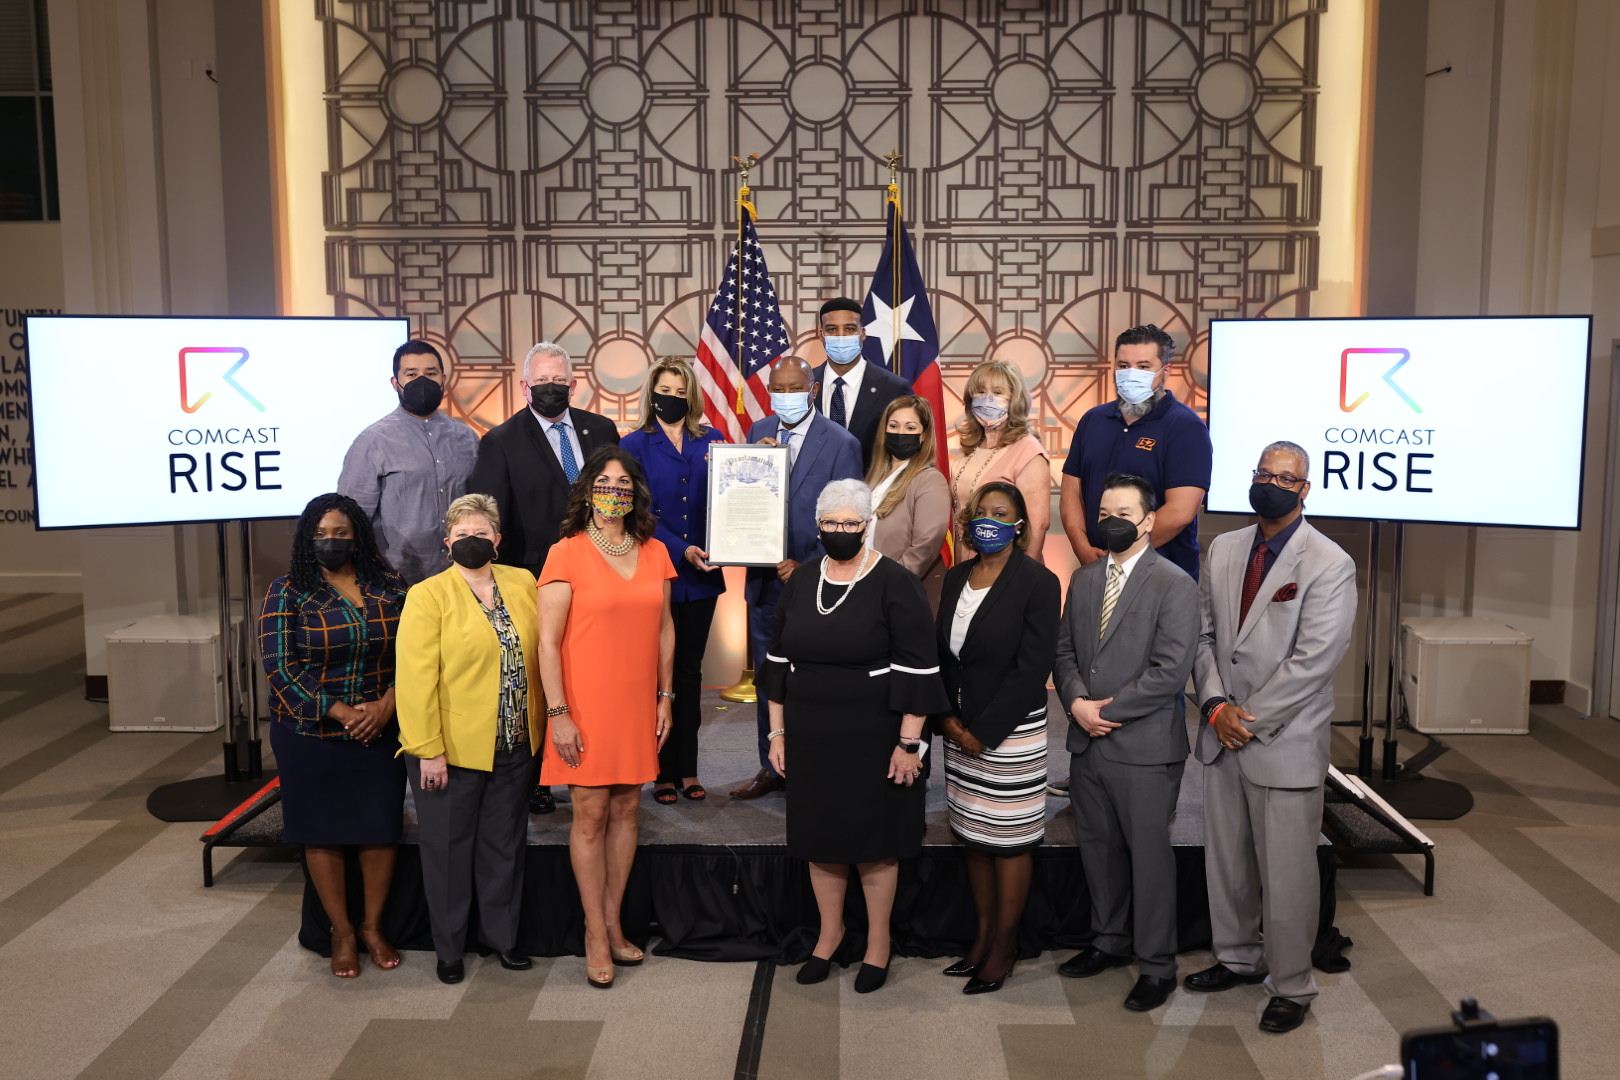 Mayor Sylvester Turner, Comcast team members, and several community leaders gathered at City Hall for a Comcast RISE event.